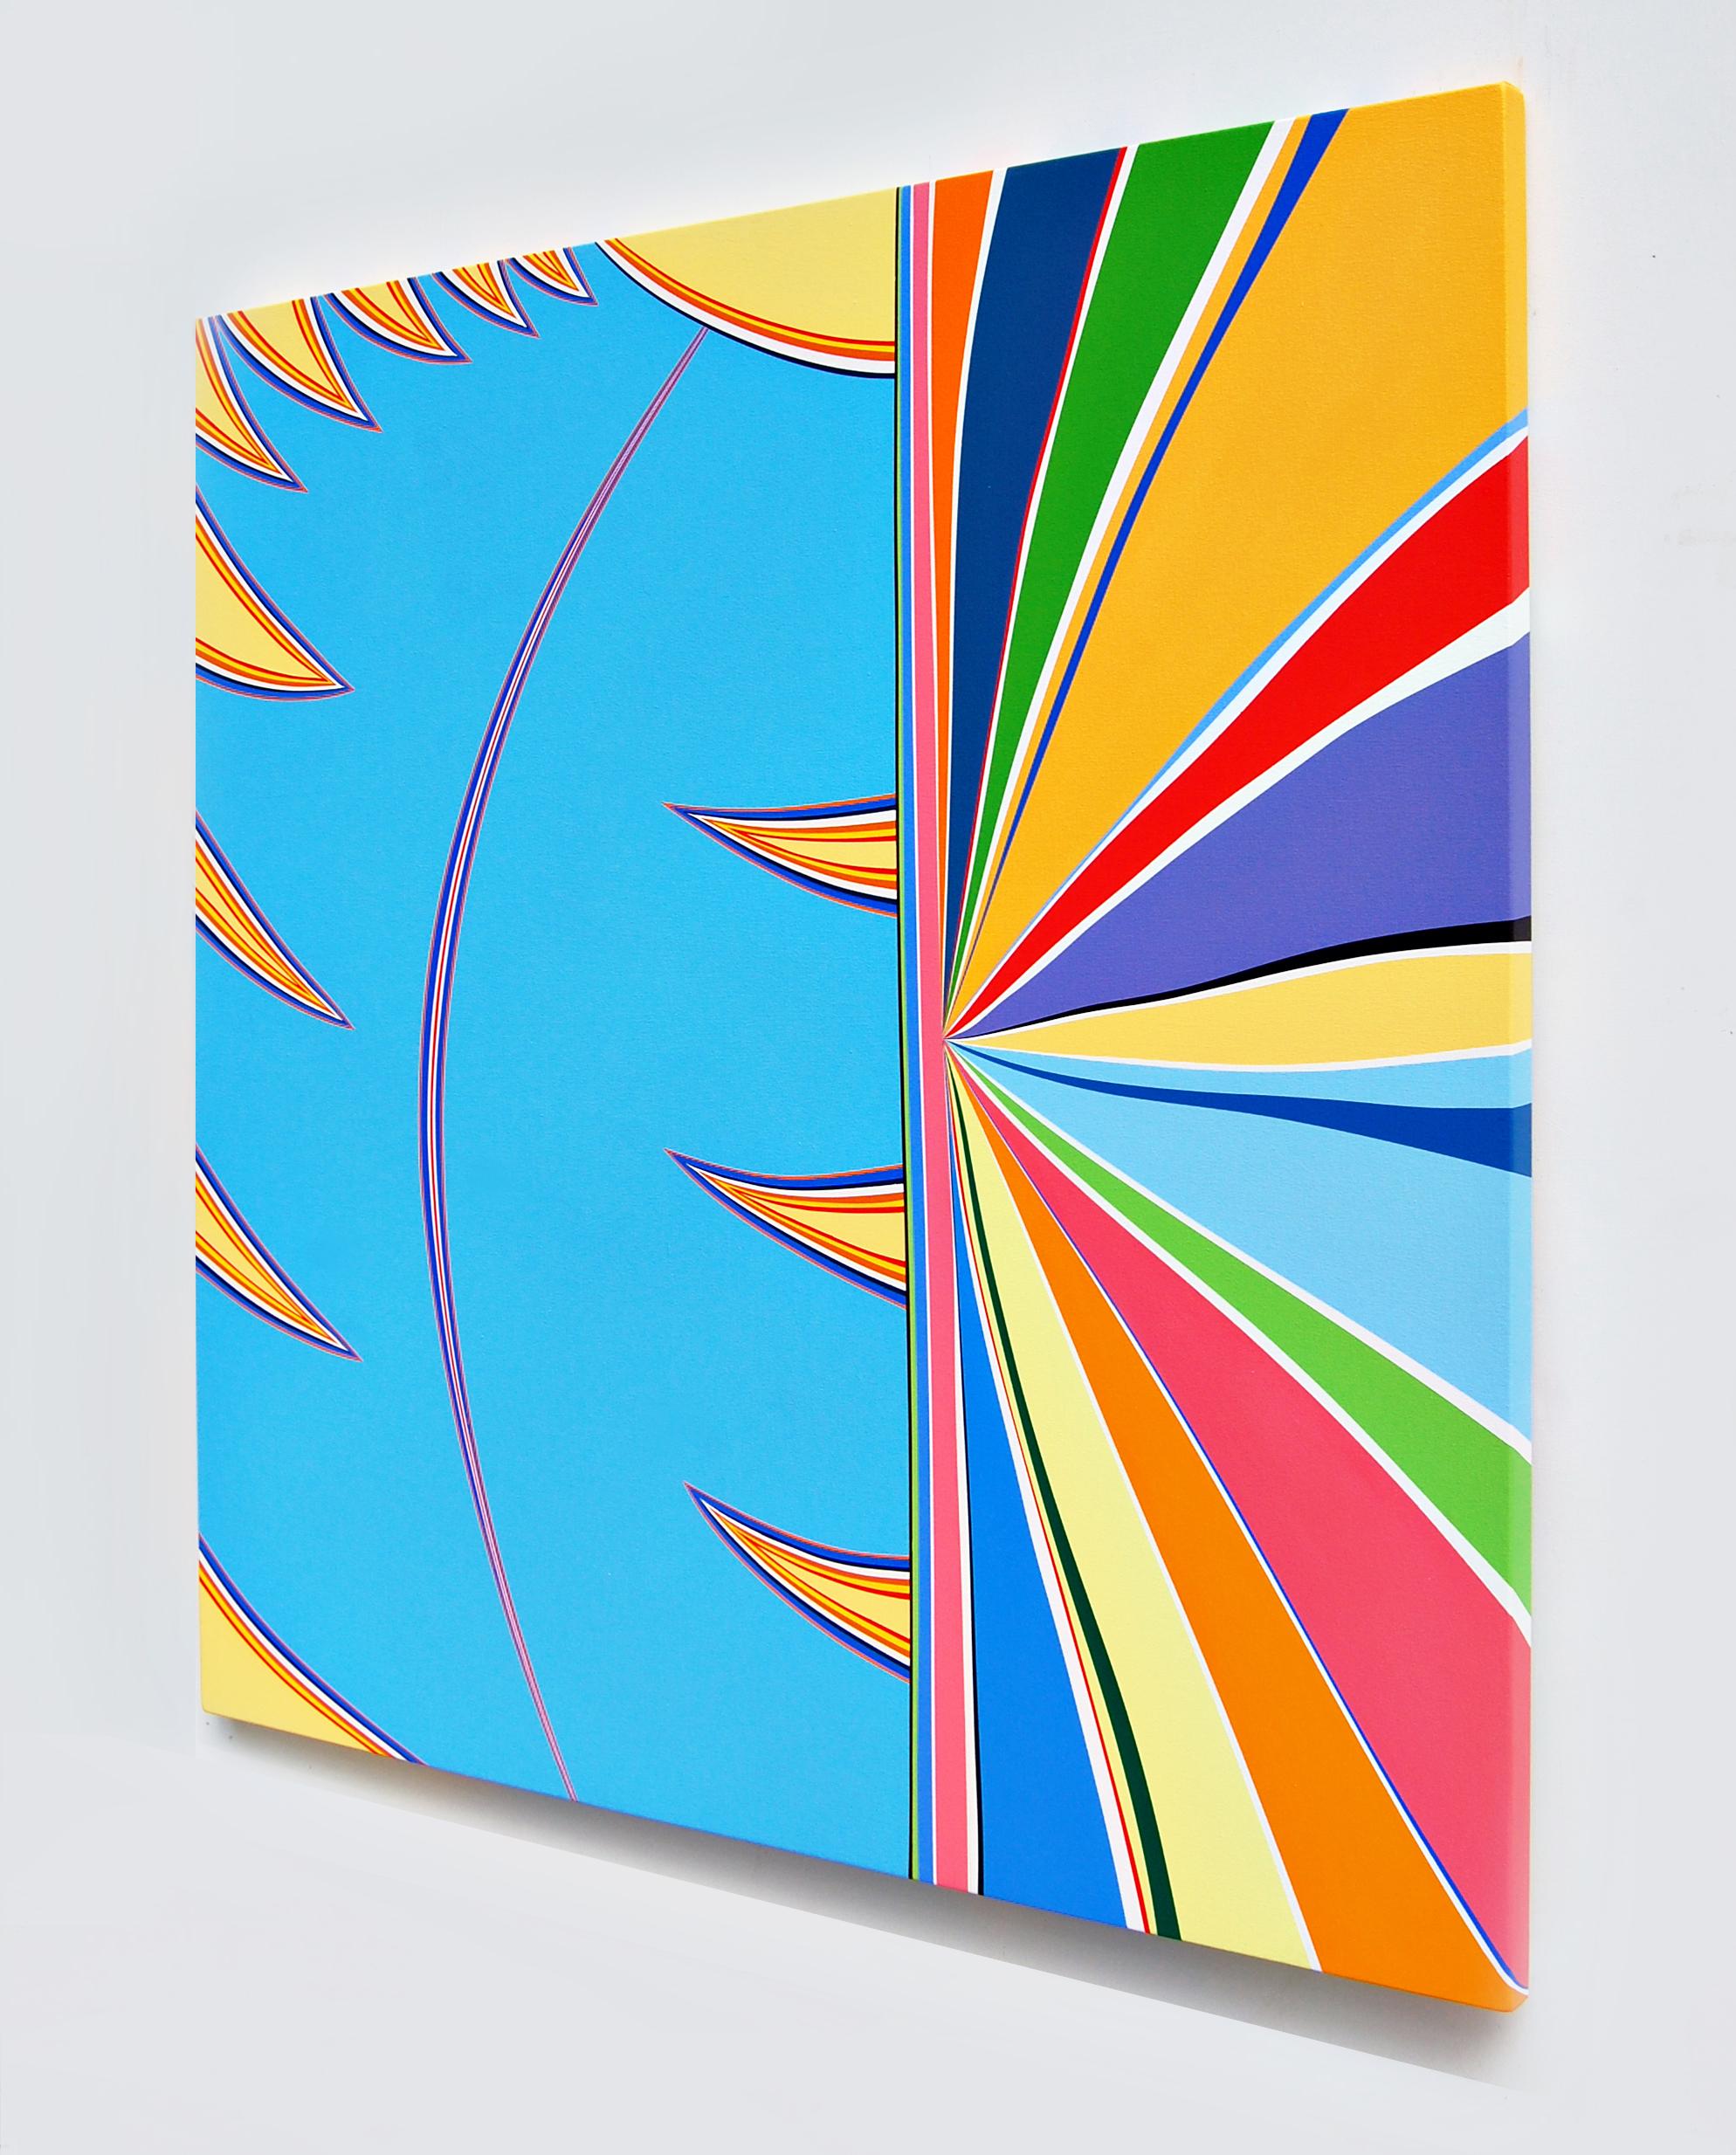 “Marlin” – from Kurt Herrmann’s Color Bomb series. This piece riffs on the
blazing sun, endless blue skies, horizons, gulf stream memories, and daydreams. The
Color Bombs are like songs composed of shape and line that bask in the presence